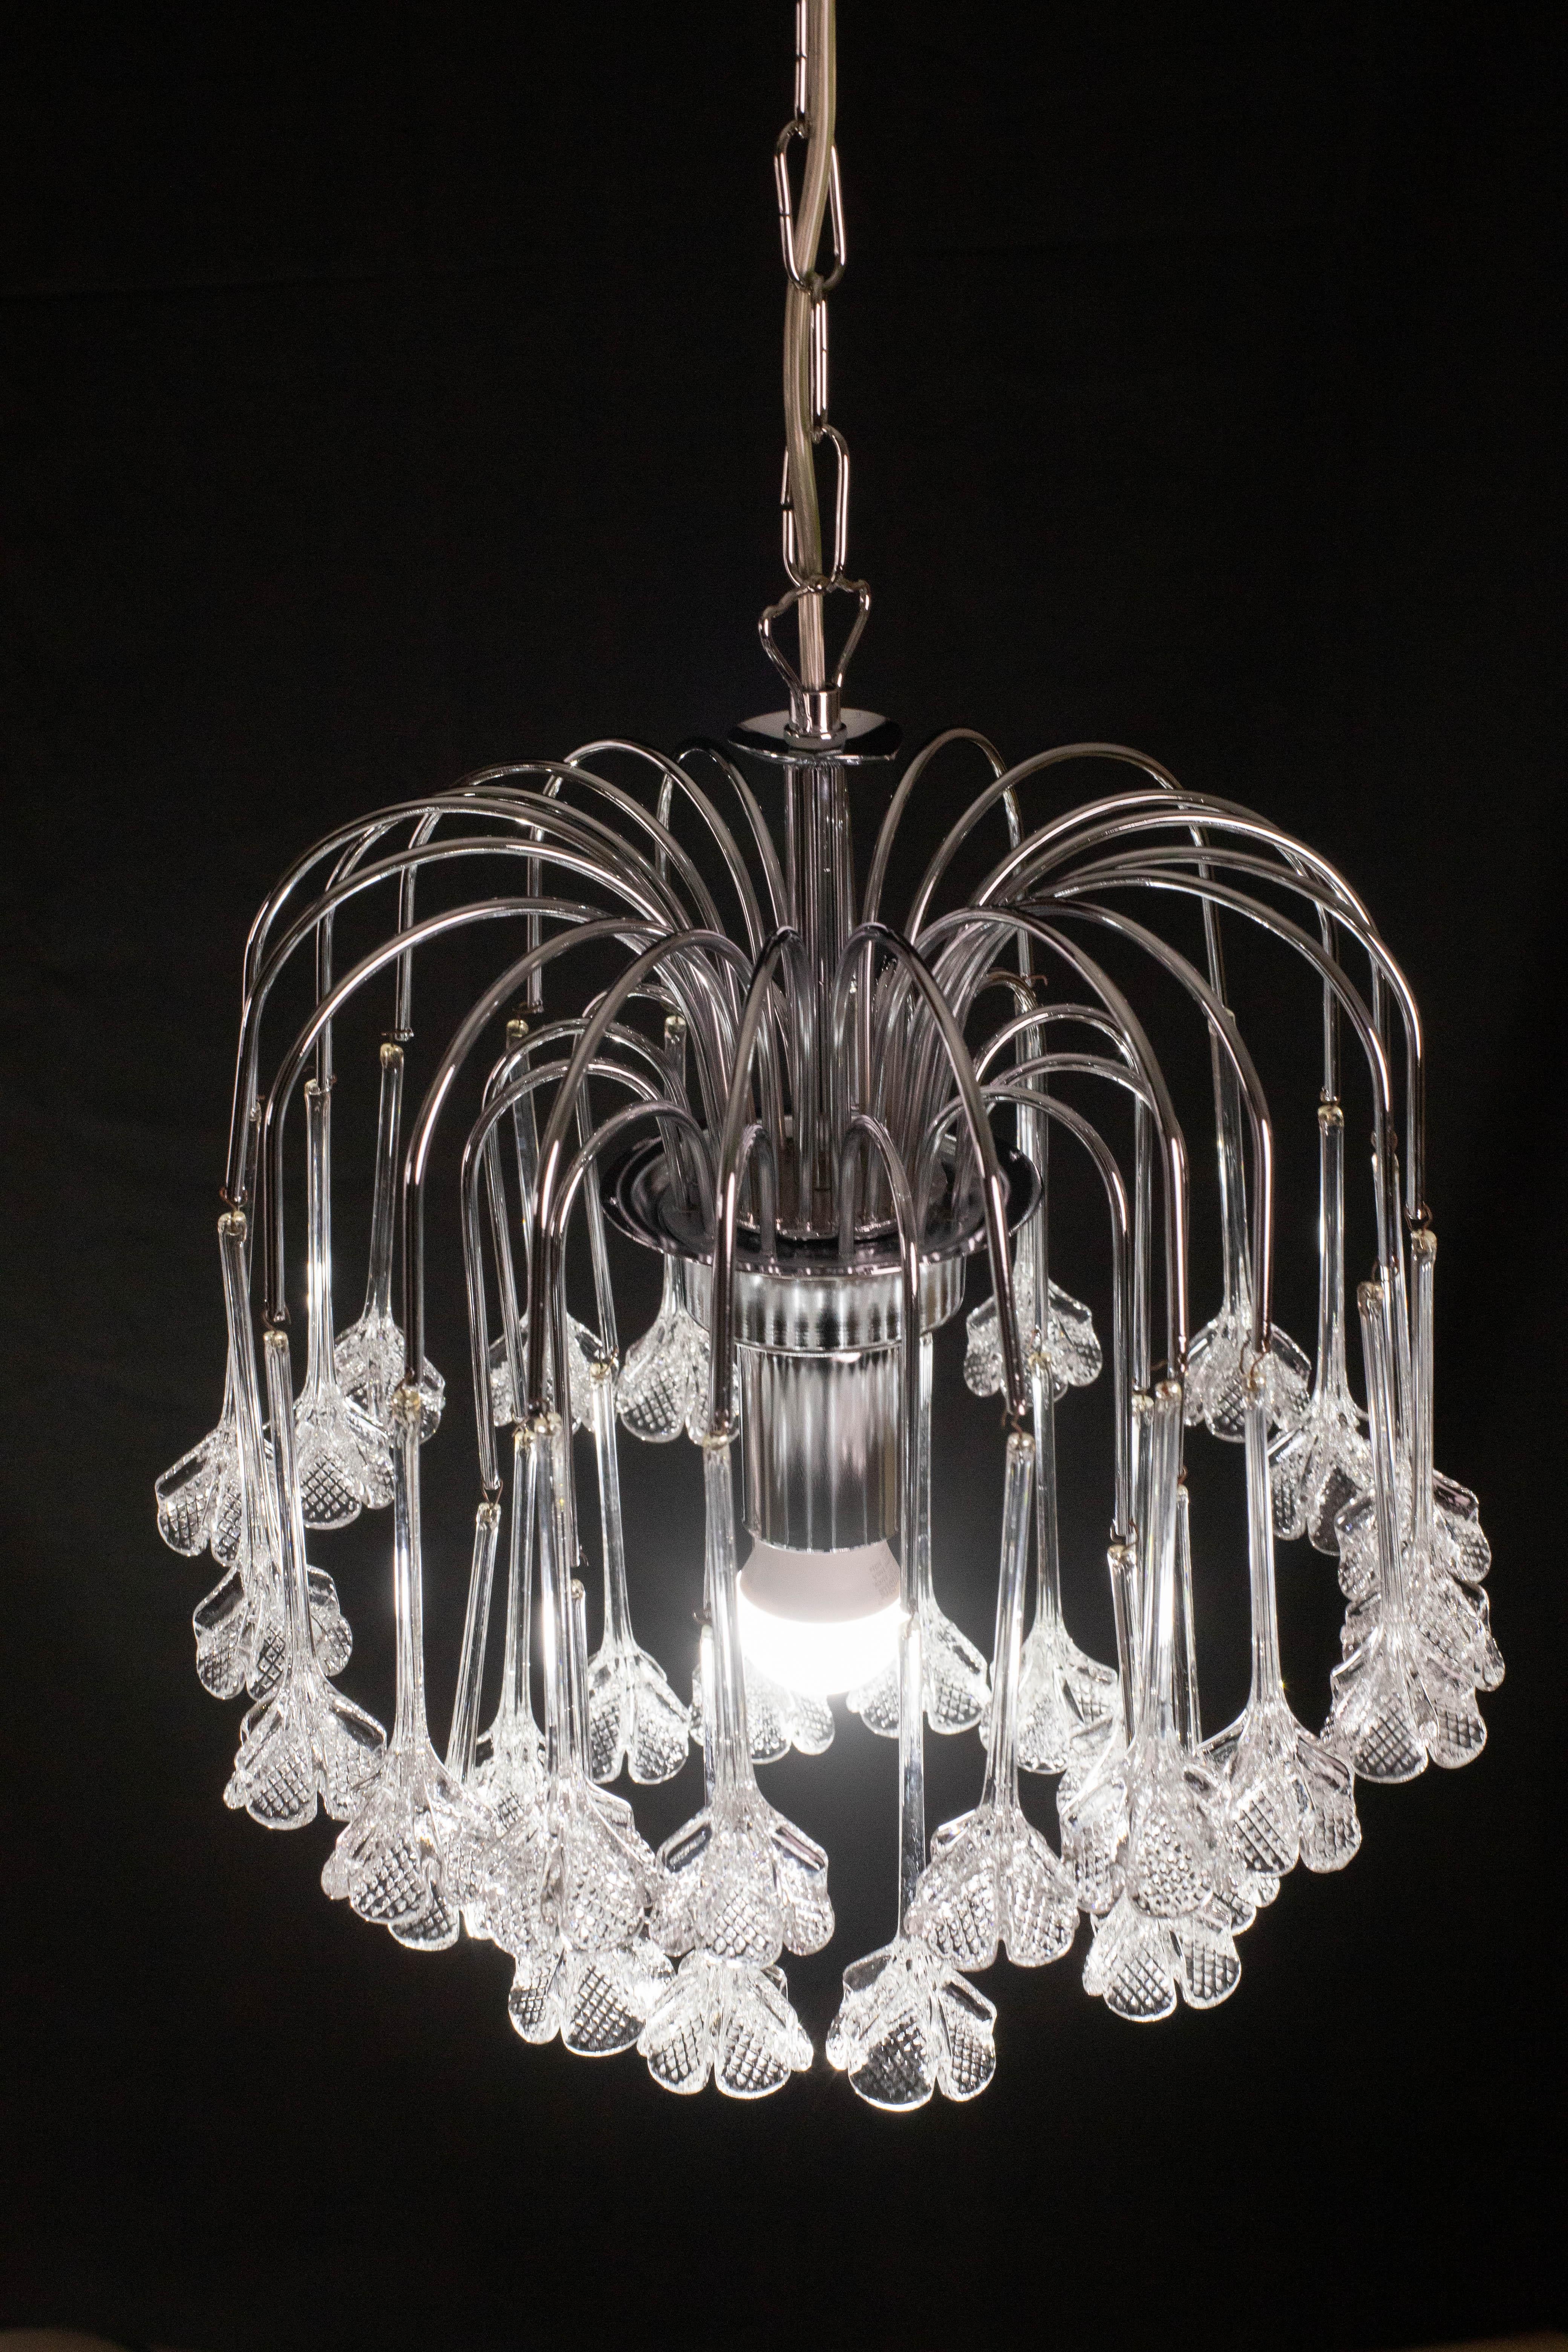 Set of 2 Julia Roberts, Vintage White Murano Chandelier, 1980s For Sale 2